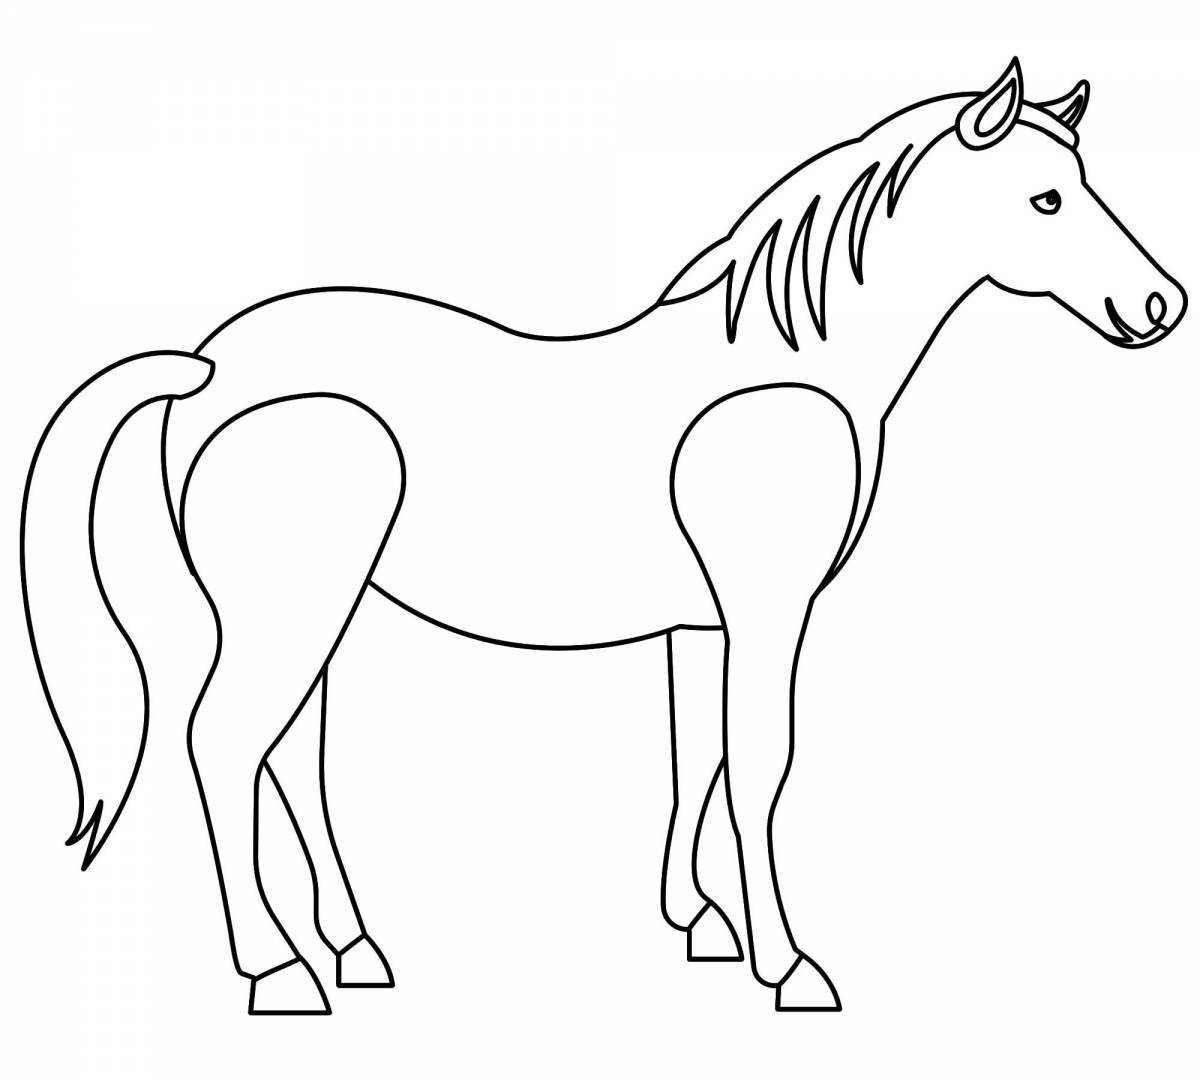 Coloring page elegant horse for children 2-3 years old